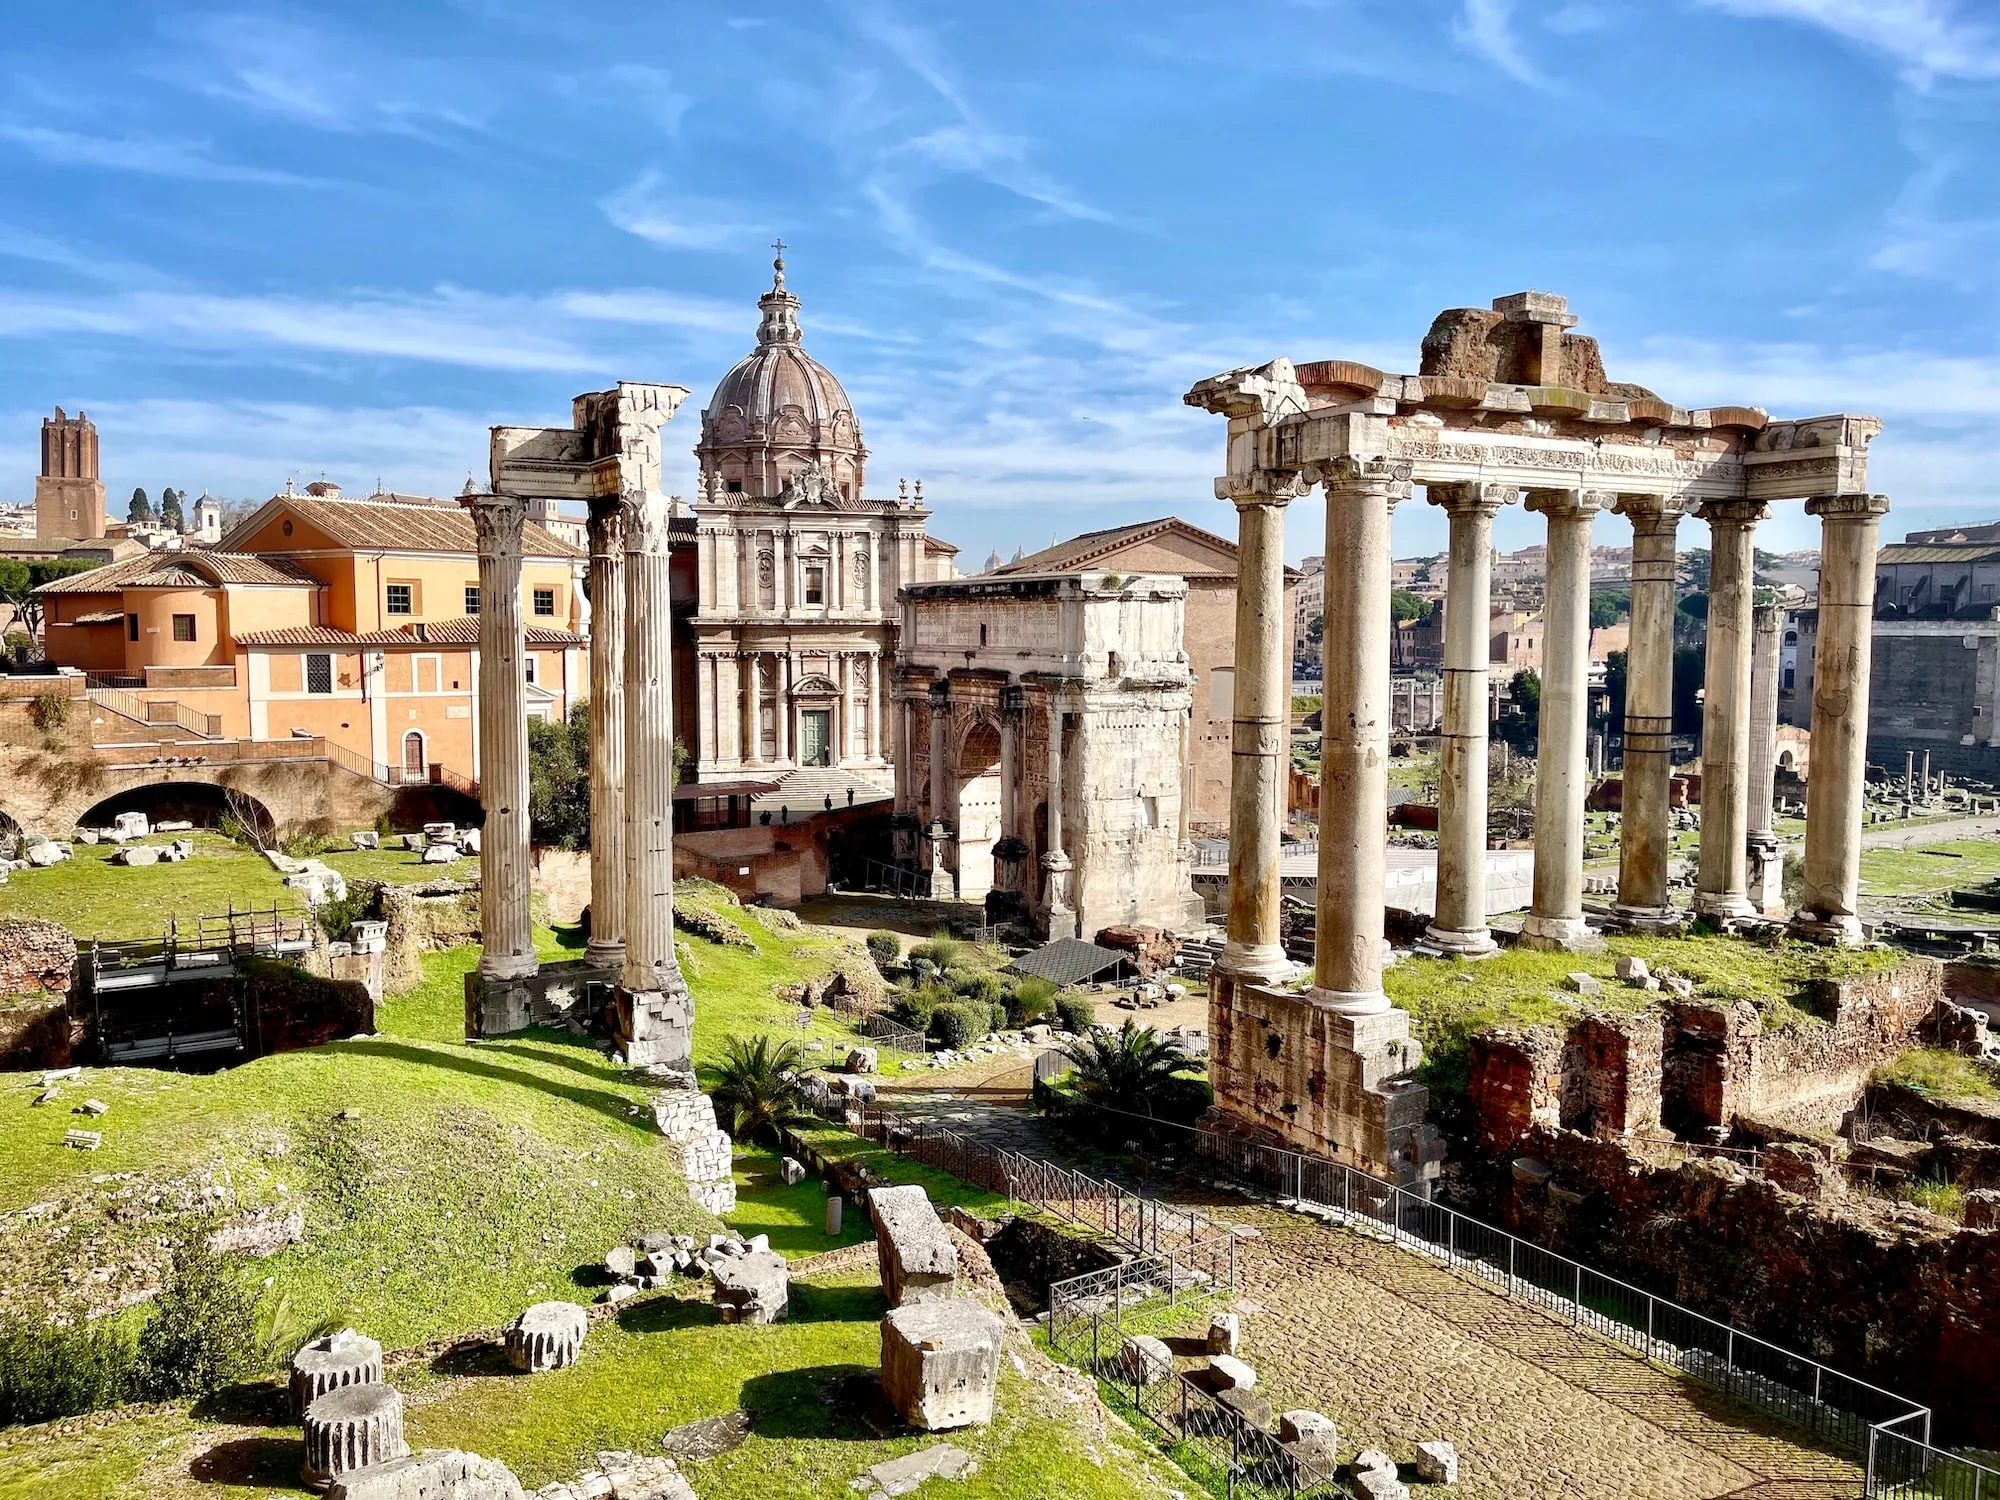 Image of the Roman Forum in Rome, Italy